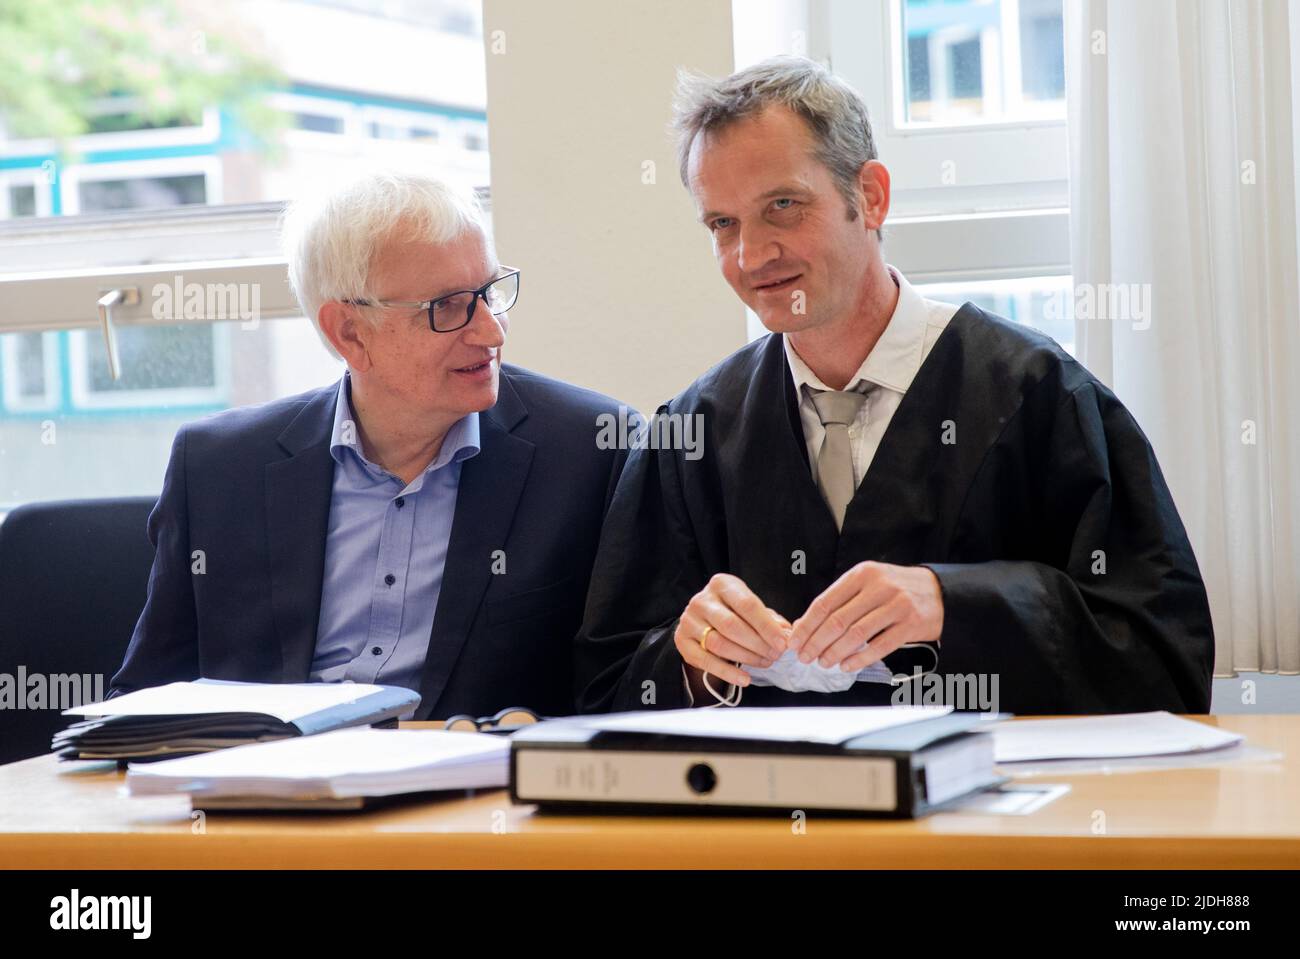 Stuttgart, Germany. 21st June, 2022. Jürgen Resch (l), Federal Executive Director of Deutsche Umwelthilfe (DUH), speaks with attorney Remo Klinger in a courtroom at Stuttgart Regional Court before the start of DUH's lawsuit against Mercedes-Benz. In the climate lawsuit, DUH is demanding that Mercedes-Benz transform the company in a climate-friendly way, in particular by reducing the CO2 emissions of its vehicles in line with the binding regulations of the Paris Climate Agreement and the German Climate Protection Act. Credit: Christoph Schmidt/dpa/Alamy Live News Stock Photo